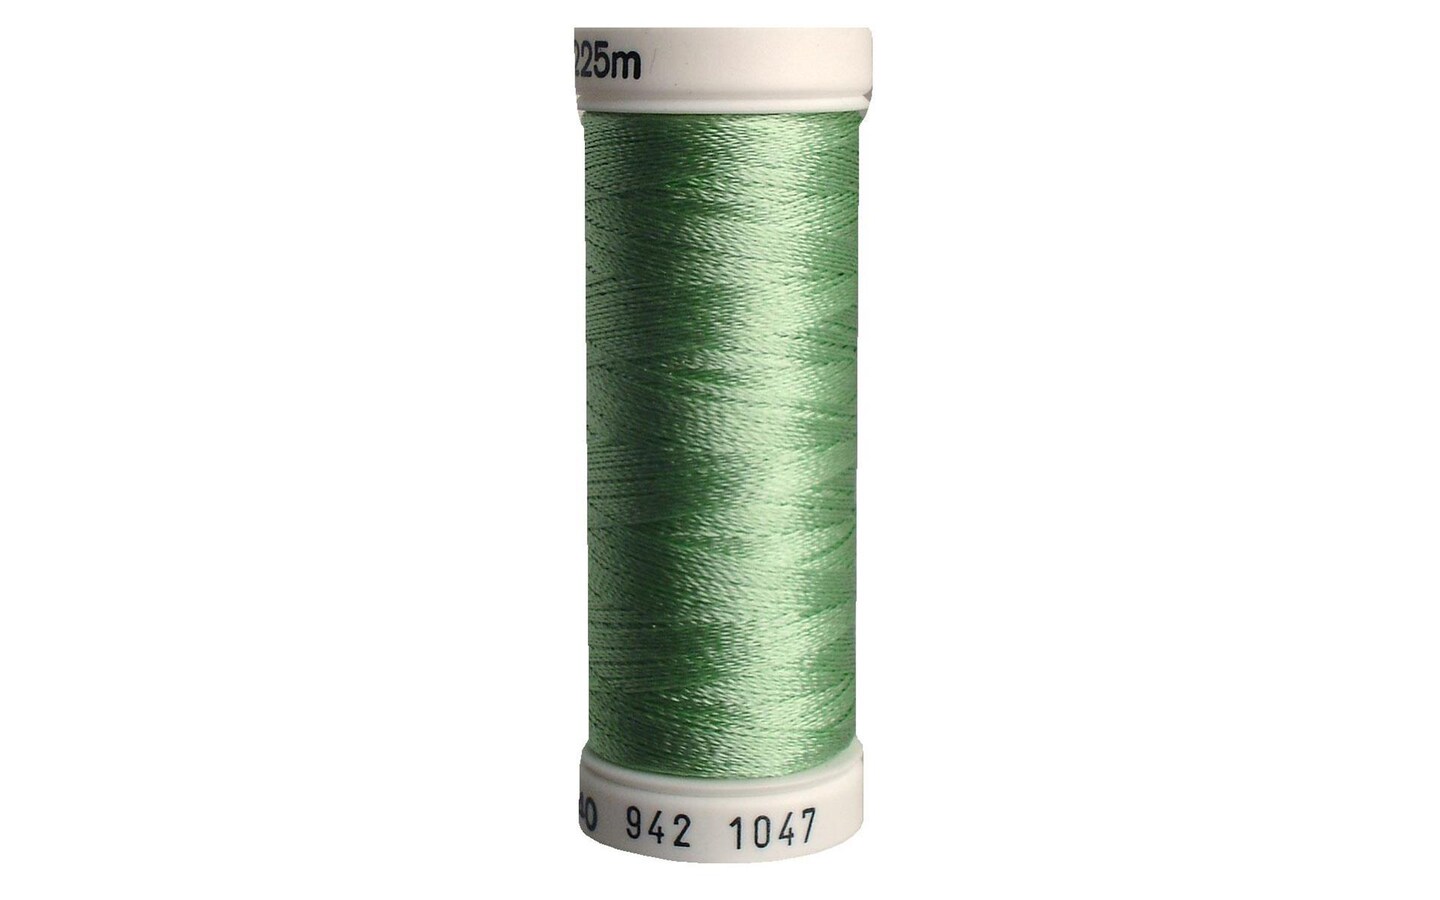 Sulky 40 Wt. 250yds Rayon Thread by Sulky